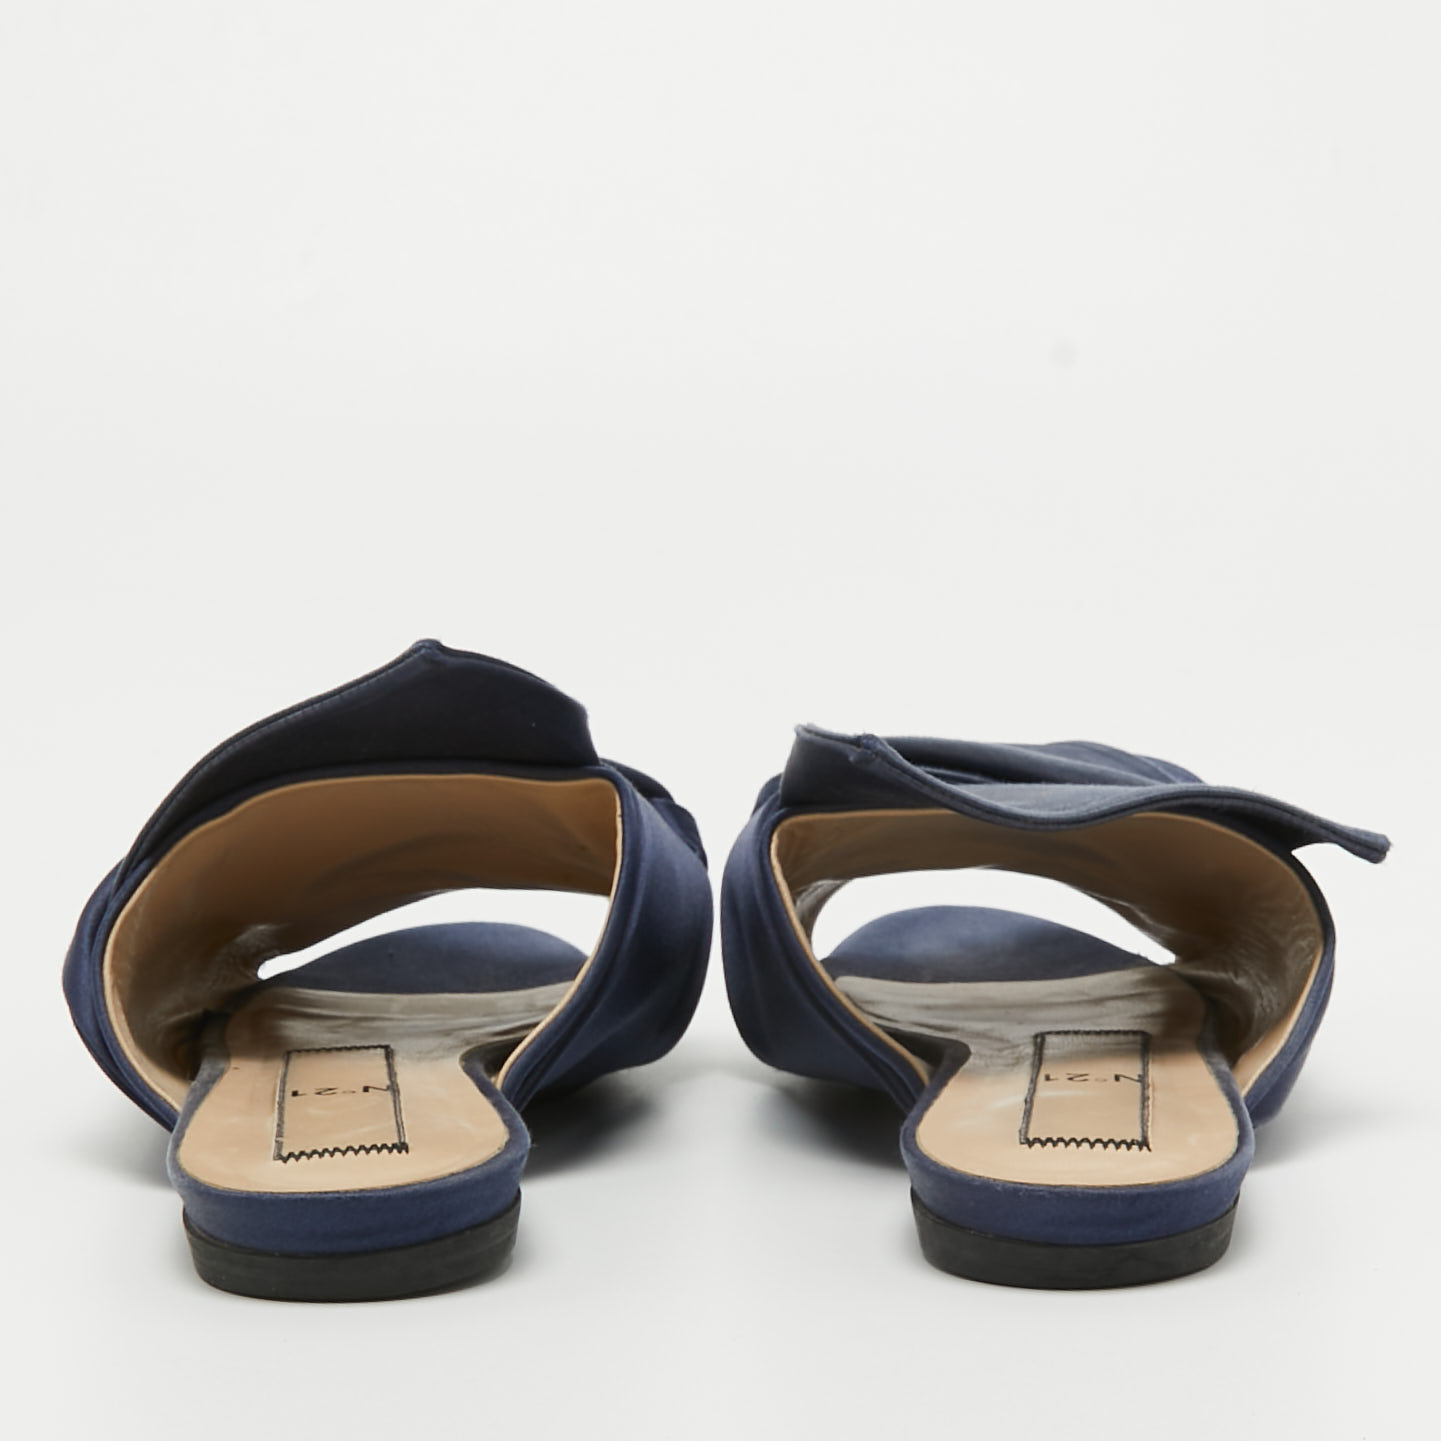 N21 Navy Blue Satin Knot Flat Mules Size 38.5